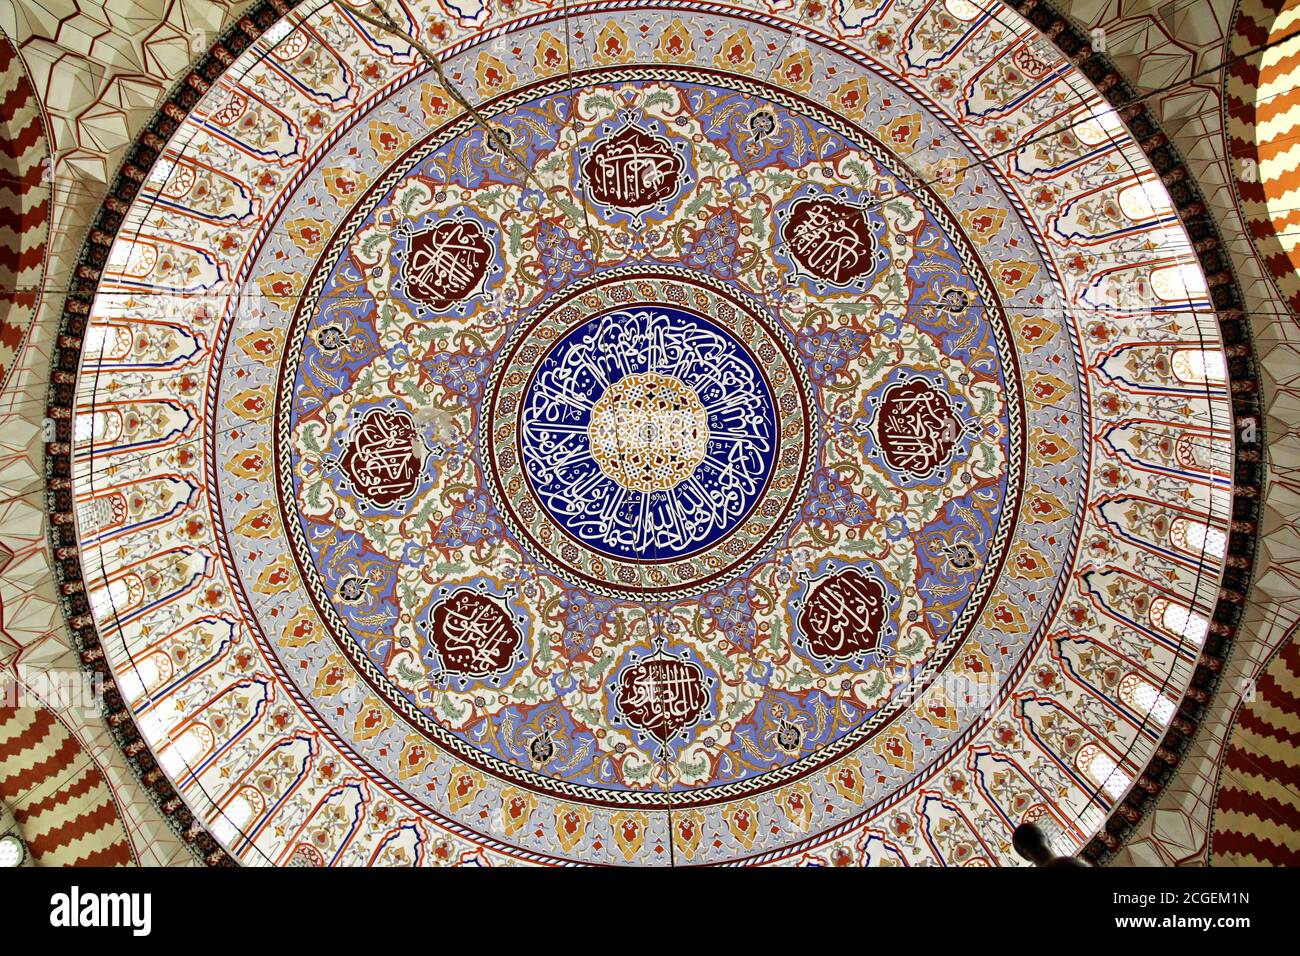 Interior view of Selimiye Mosque, ceiling and dome. The masterpiece of Mimar Sinan in Ottoman Empire's golden era. Stock Photo